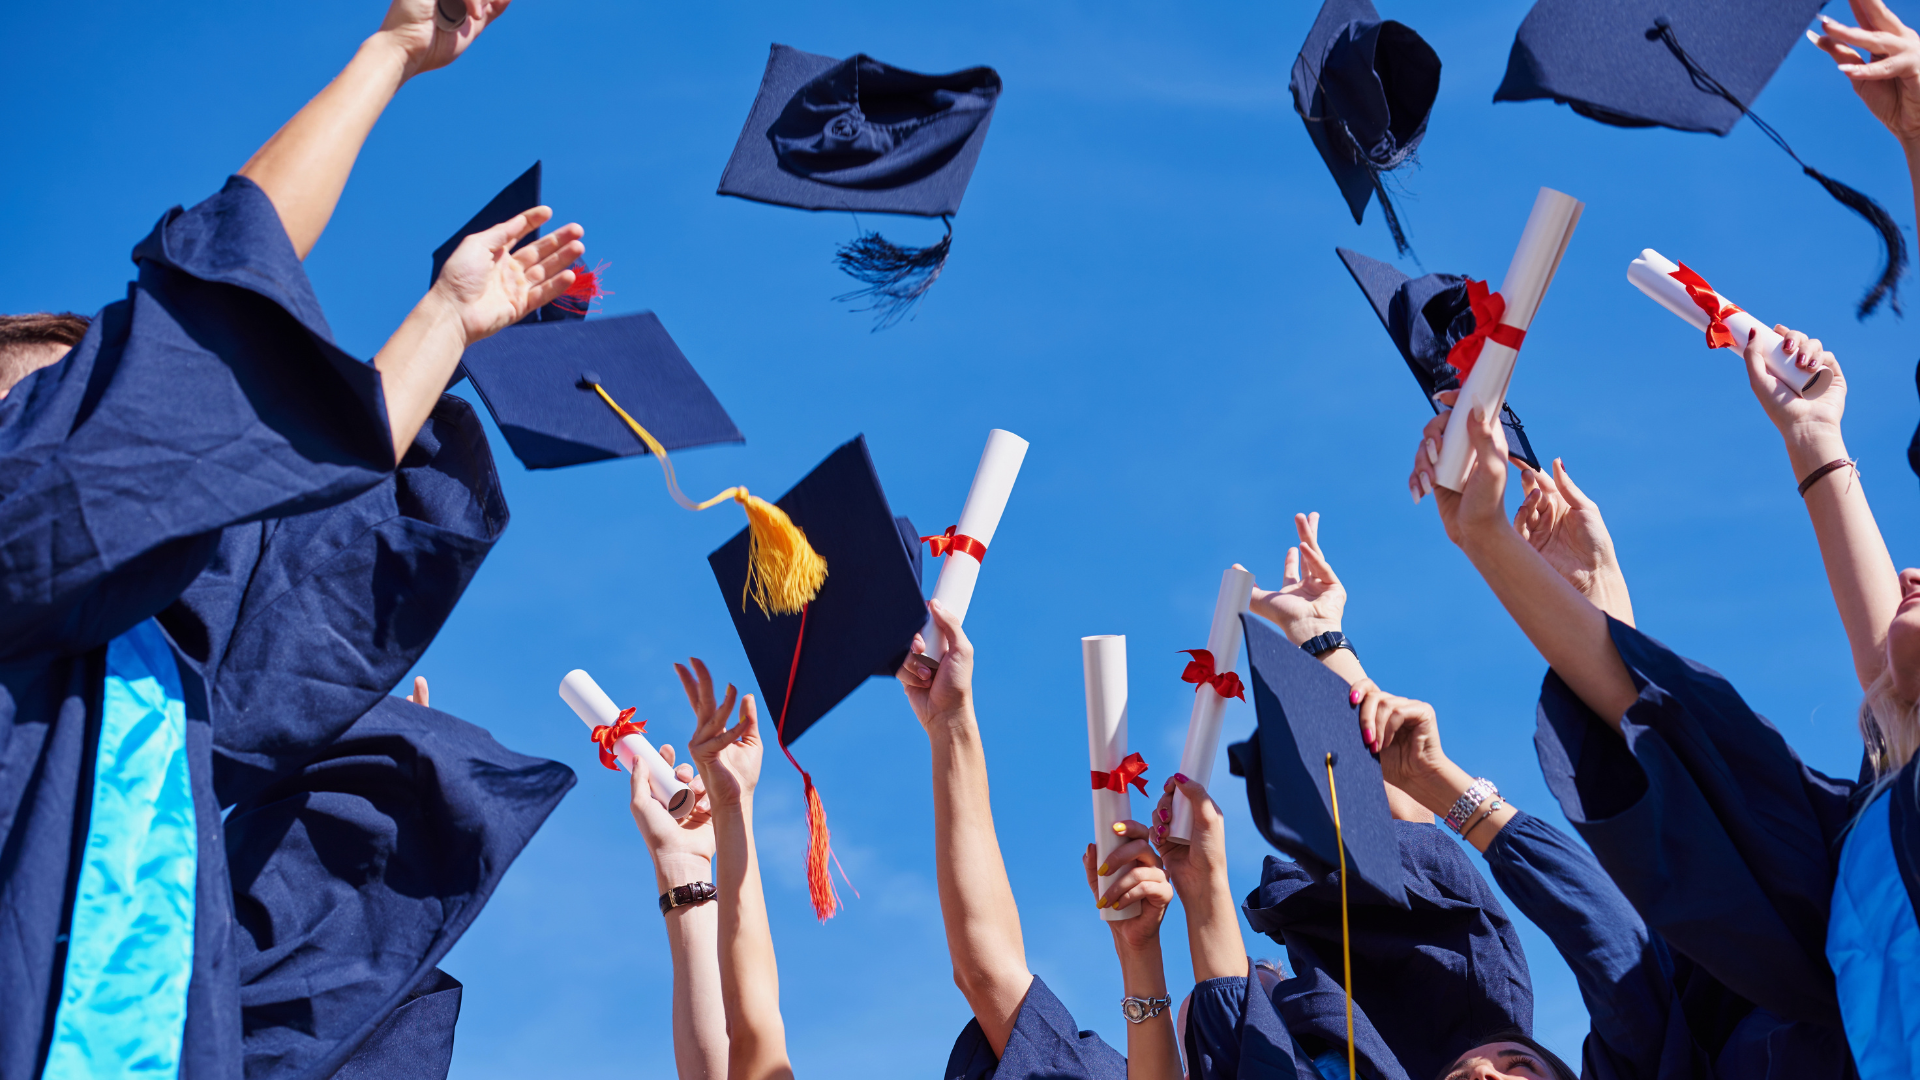 What Types of Gifts Can You Give a High School Graduate?